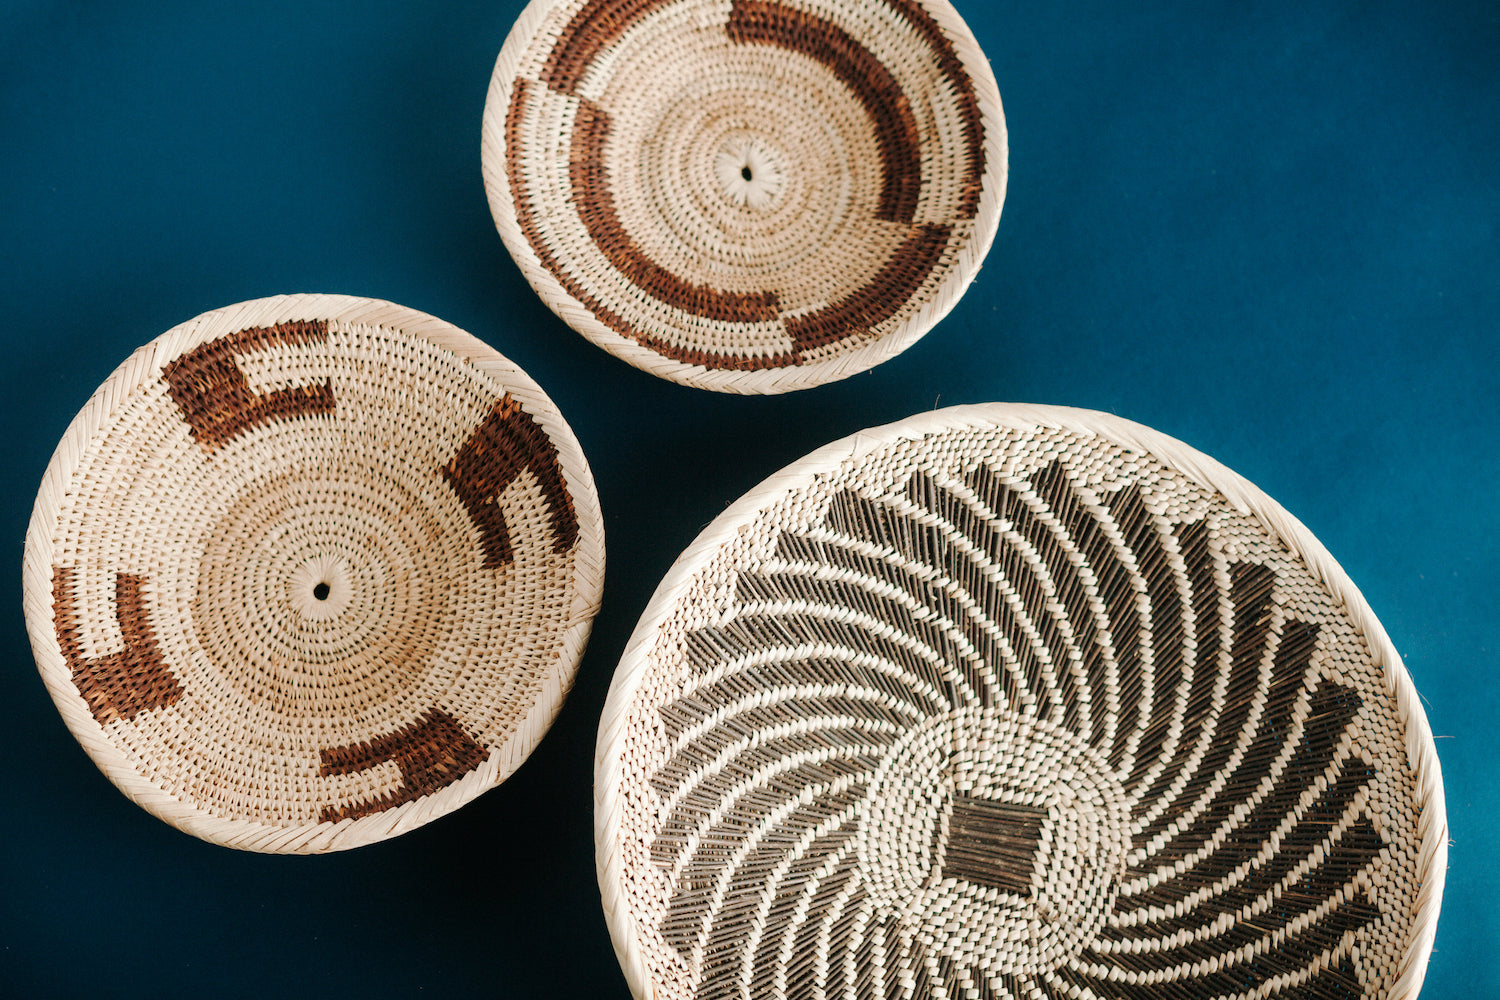 hand-woven tonga baskets on a blue background